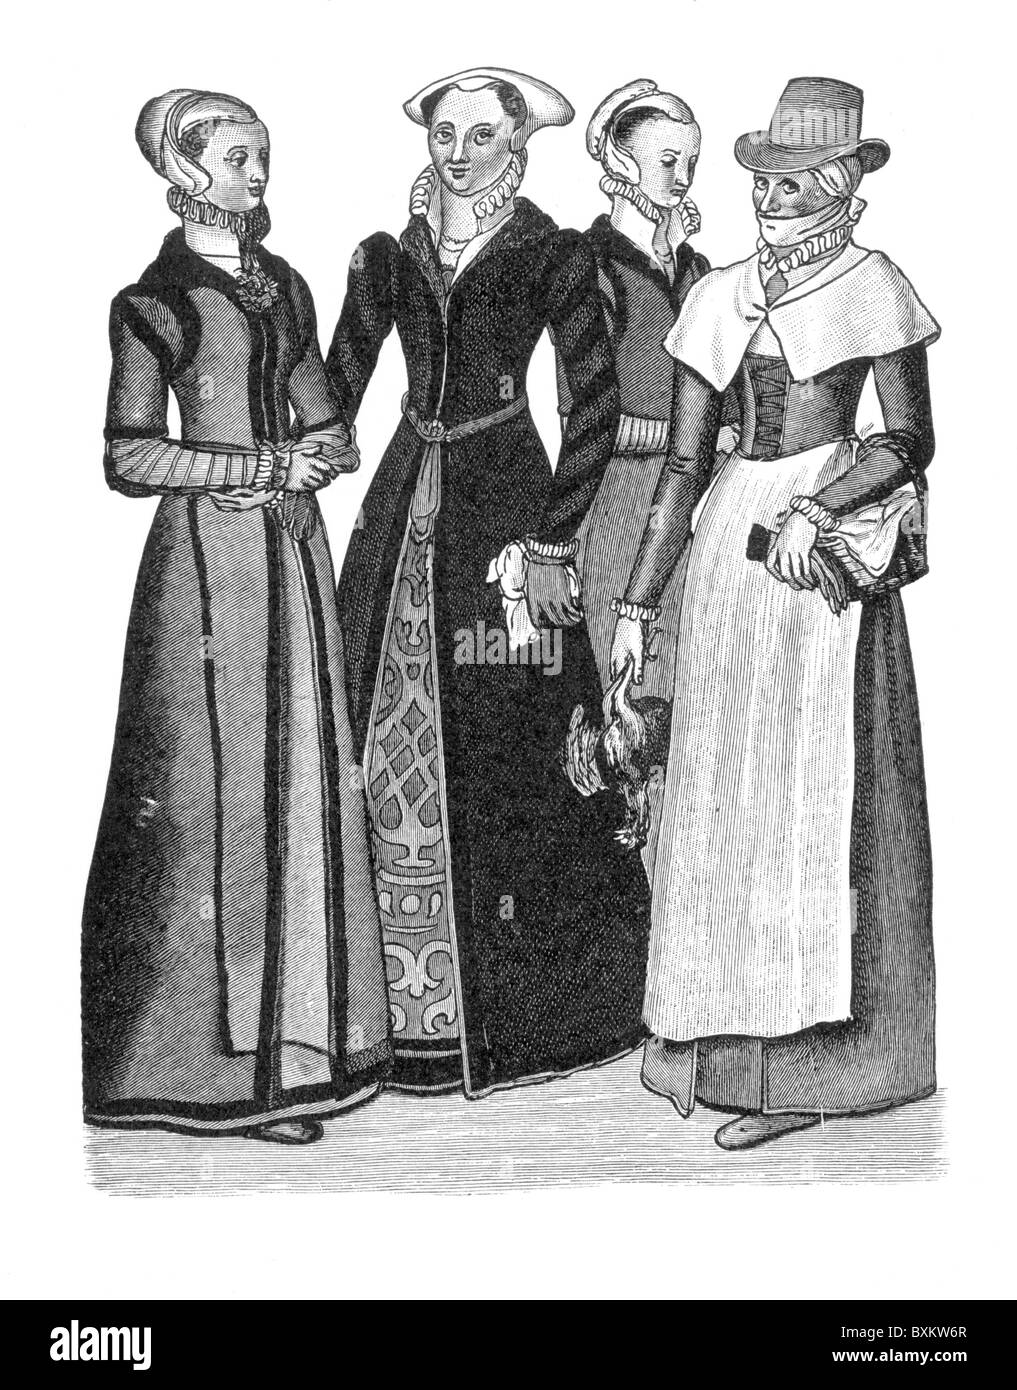 Costumes of Burgher-Women and a Country Woman; 16th century; Black and White Illustration; Stock Photo